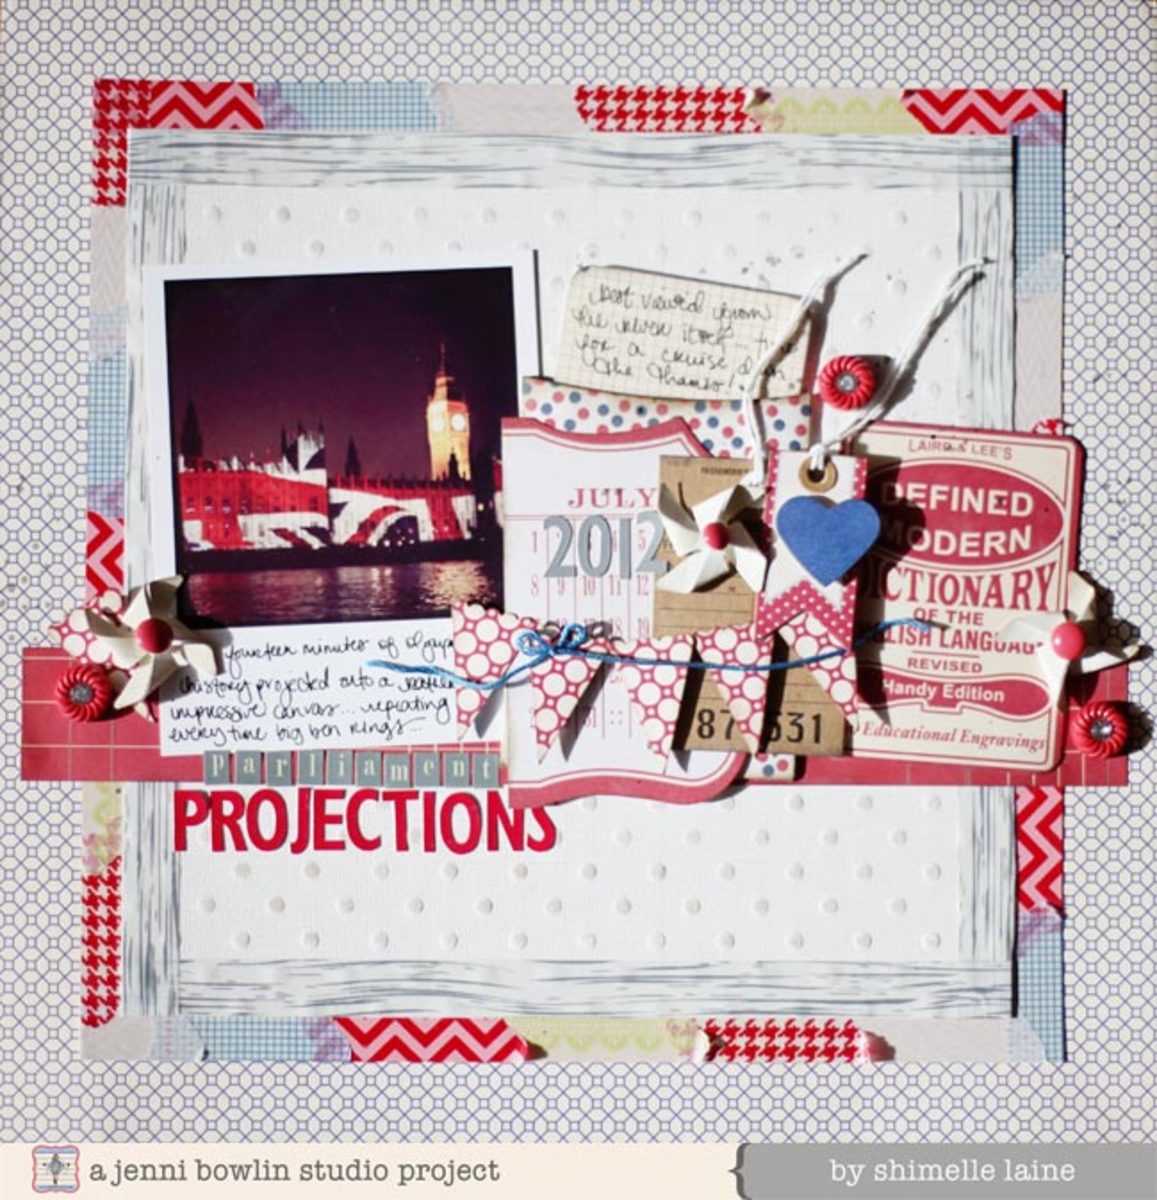 You can create amazing frames for your scrapbook pages with washi tape